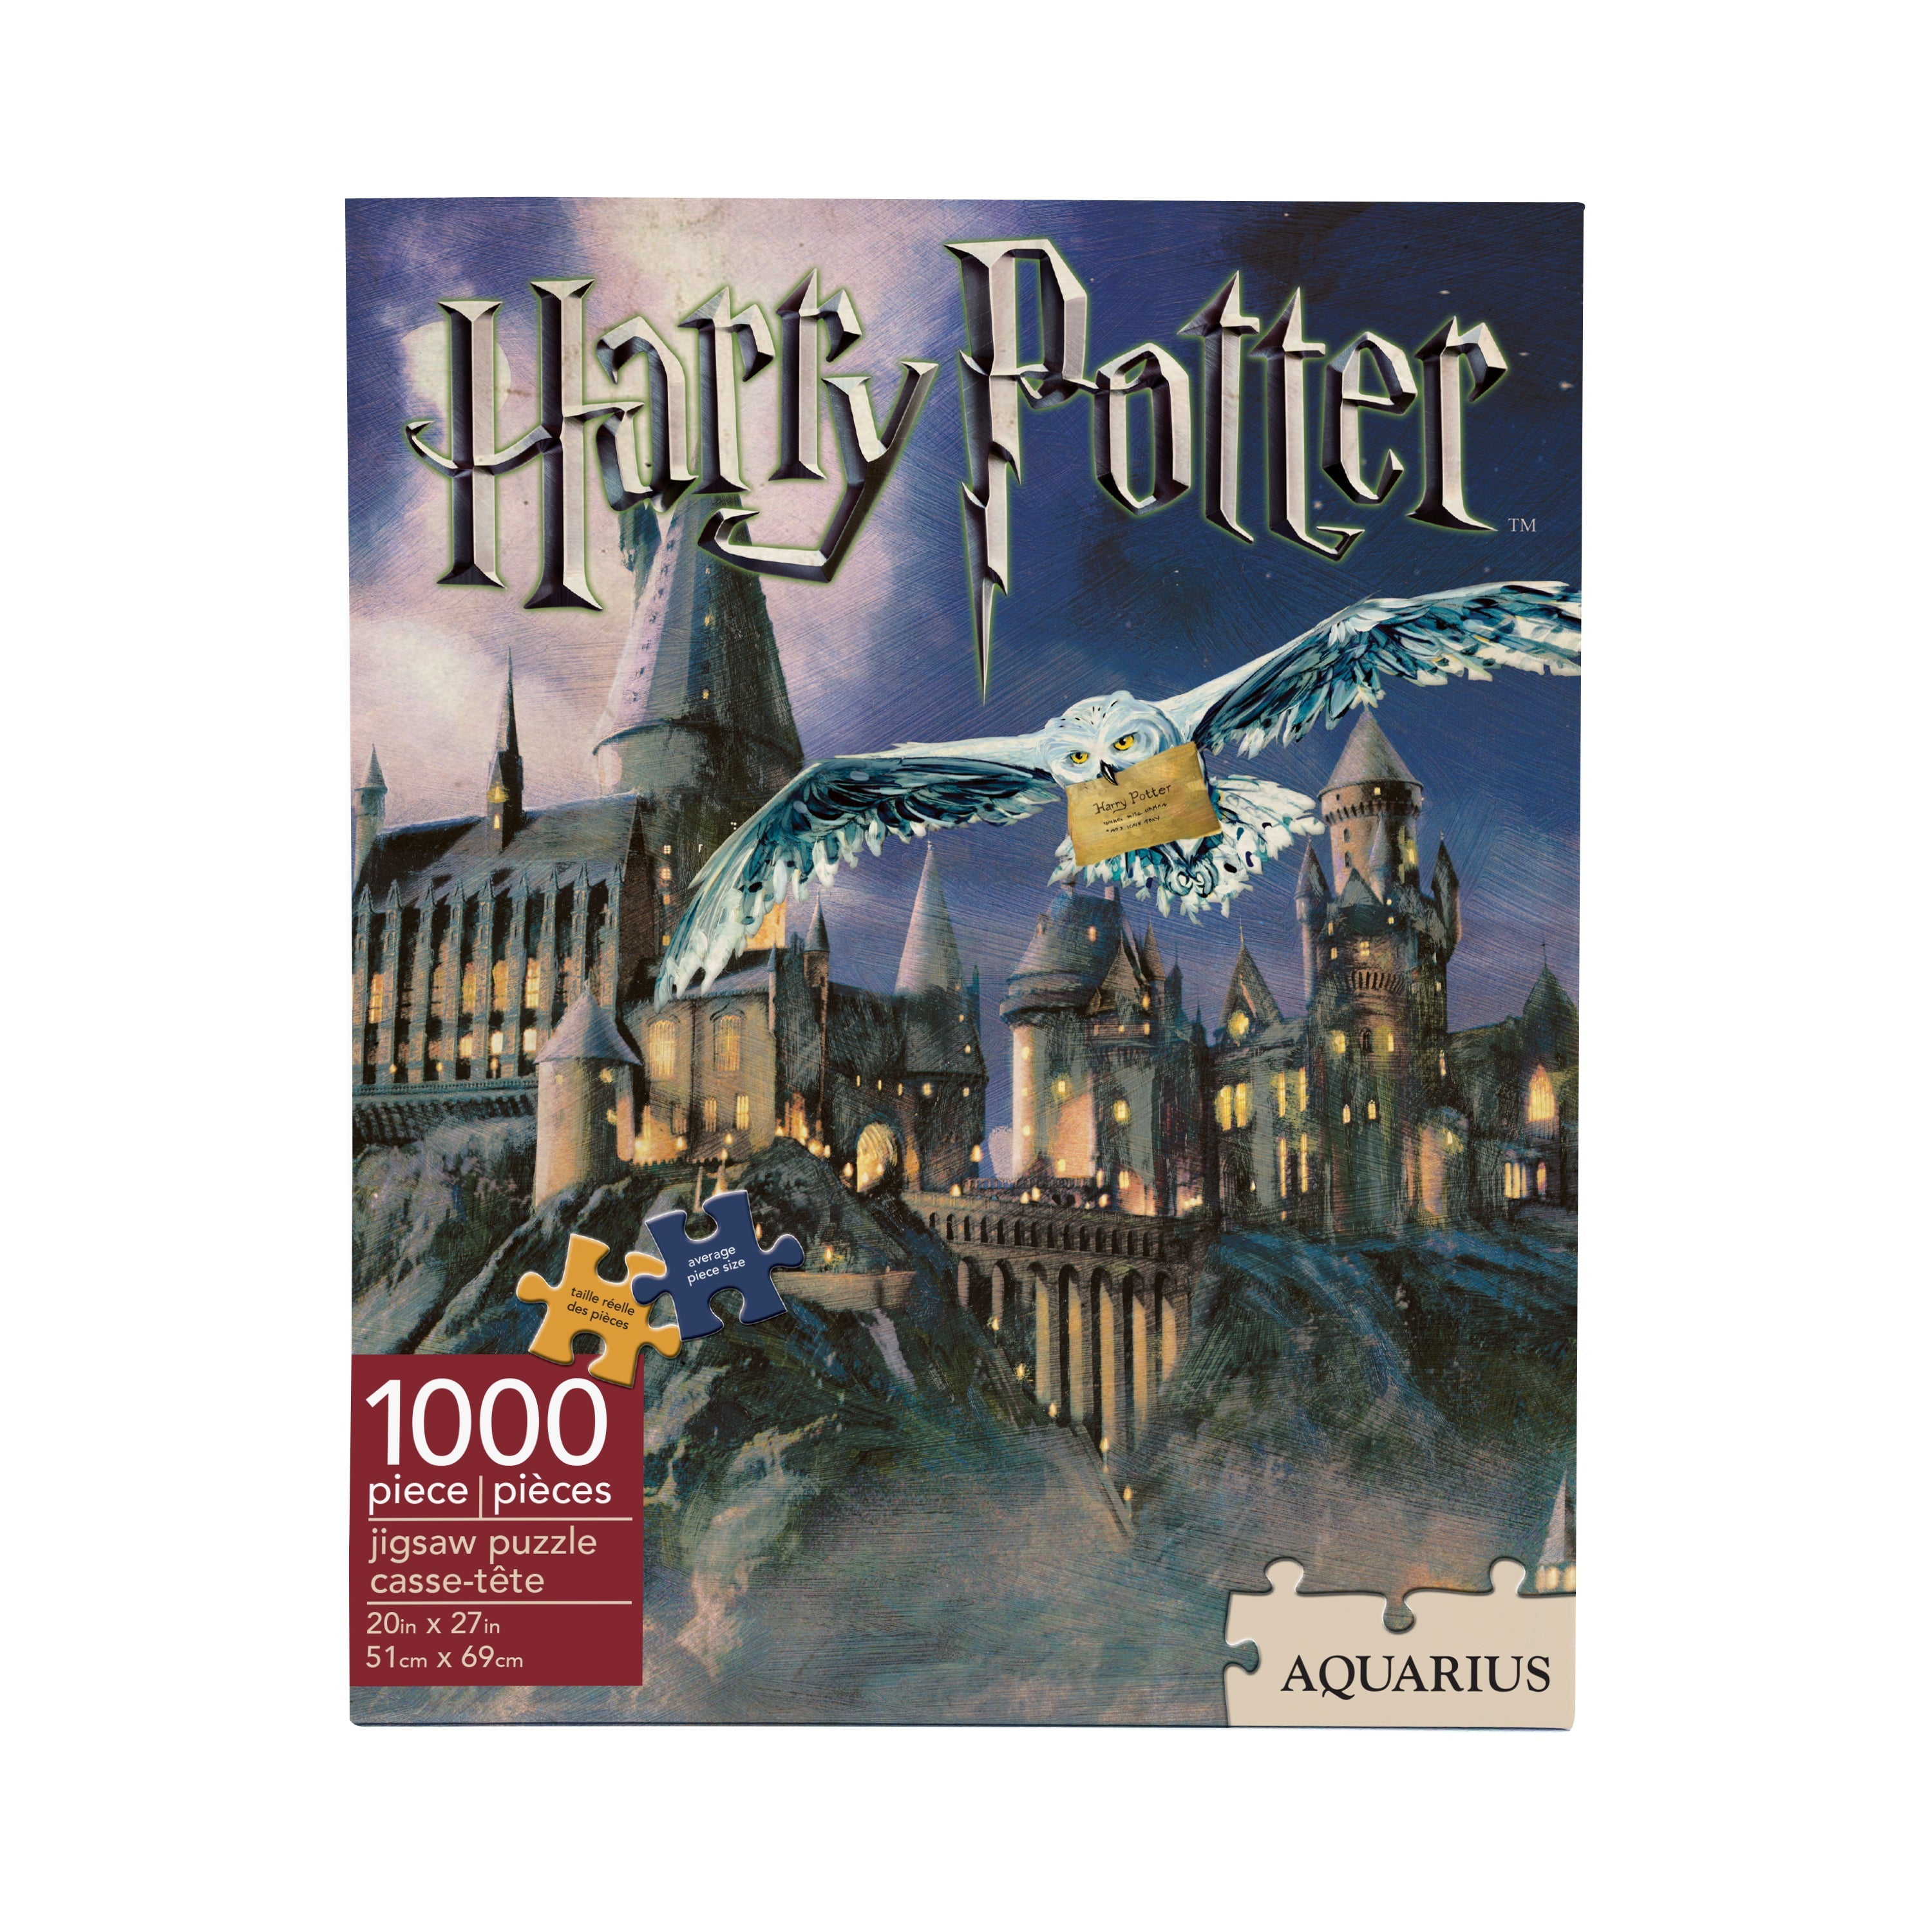 nm Harry Potter Collage 1000 piece jigsaw puzzle 690mm x 510mm 